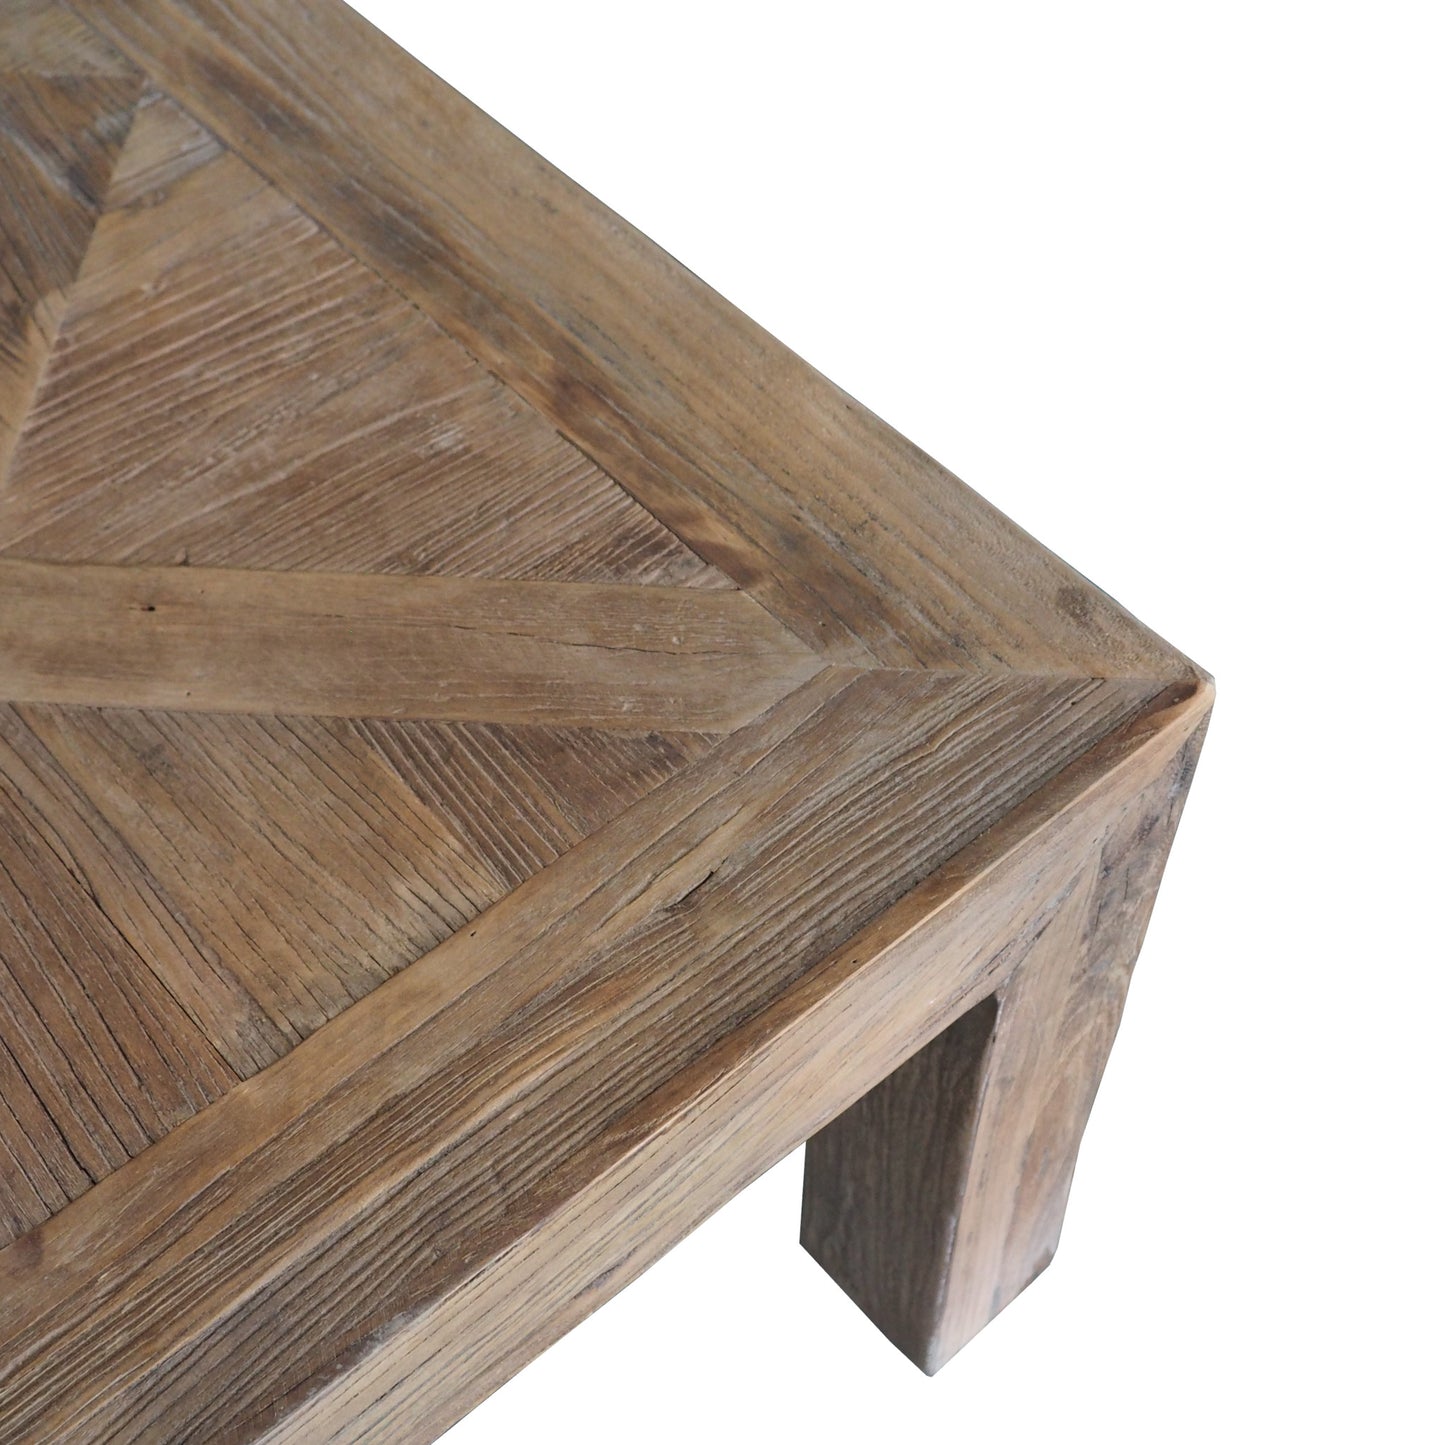 Classic Rectangular Wooden Coffee Table By Homeroots